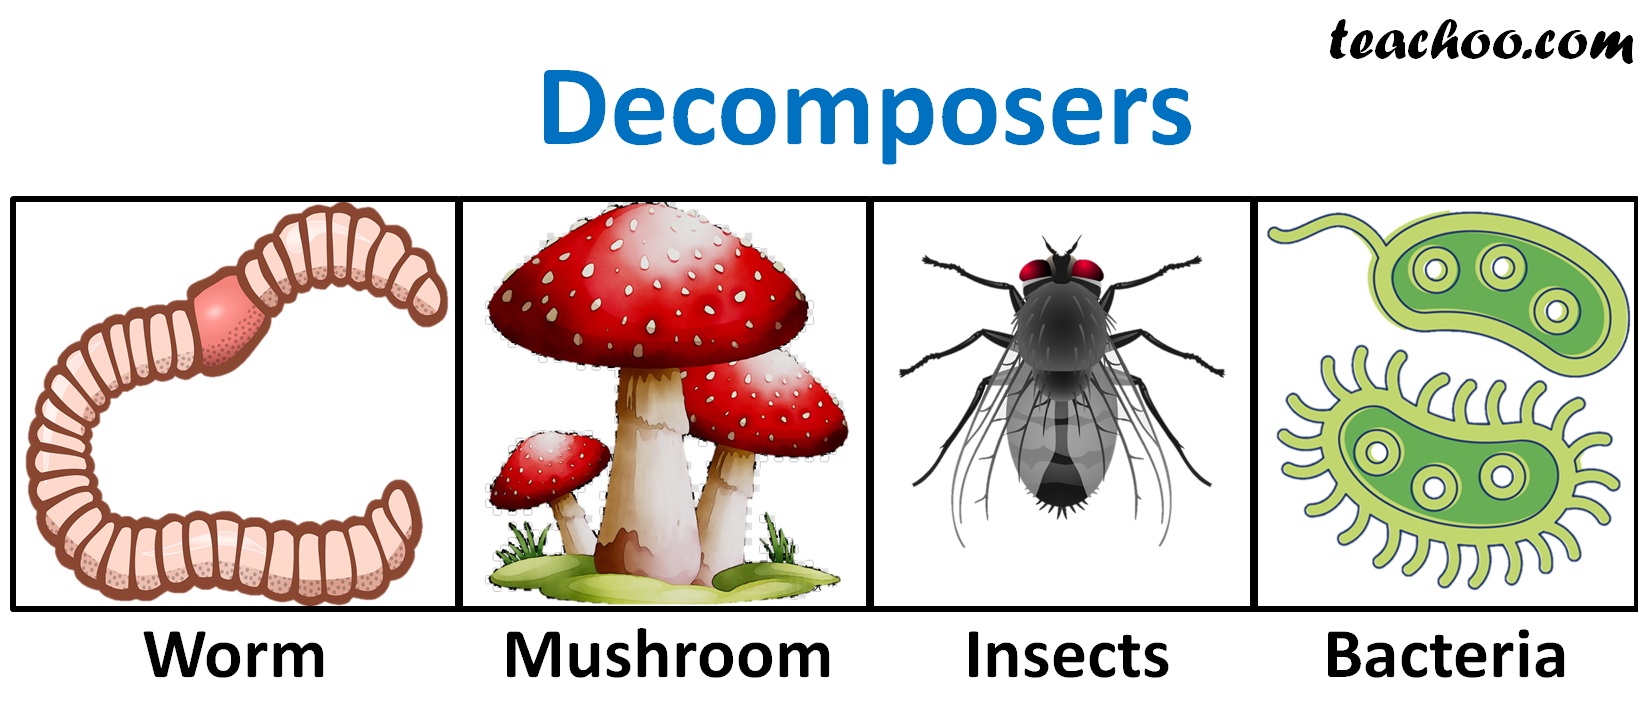 What is the role of decomposers